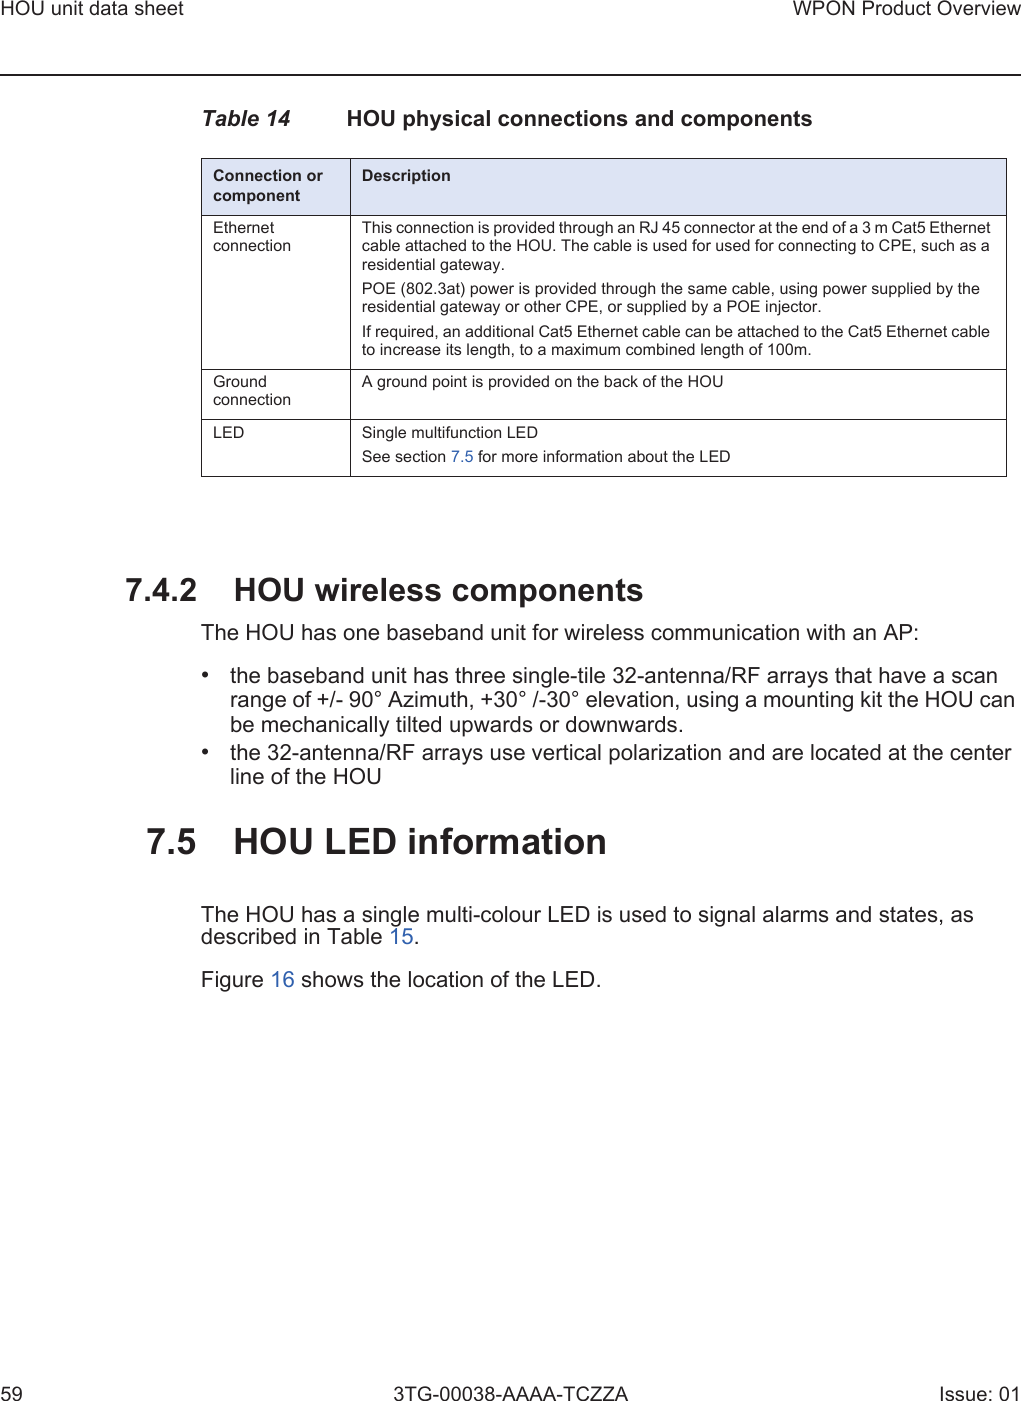 HOU unit data sheet59WPON Product Overview3TG-00038-AAAA-TCZZA Issue: 01Table 14 HOU physical connections and components7.4.2 HOU wireless componentsThe HOU has one baseband unit for wireless communication with an AP: •the baseband unit has three single-tile 32-antenna/RF arrays that have a scanrange of +/- 90° Azimuth, +30° /-30° elevation, using a mounting kit the HOU canbe mechanically tilted upwards or downwards.•the 32-antenna/RF arrays use vertical polarization and are located at the centerline of the HOU7.5 HOU LED informationThe HOU has a single multi-colour LED is used to signal alarms and states, as described in Table 15. Figure 16 shows the location of the LED.Connection or componentDescriptionEthernet connectionThis connection is provided through an RJ 45 connector at the end of a 3 m Cat5 Ethernet cable attached to the HOU. The cable is used for used for connecting to CPE, such as a residential gateway. POE (802.3at) power is provided through the same cable, using power supplied by the residential gateway or other CPE, or supplied by a POE injector.If required, an additional Cat5 Ethernet cable can be attached to the Cat5 Ethernet cable to increase its length, to a maximum combined length of 100m.Ground connectionA ground point is provided on the back of the HOULED Single multifunction LEDSee section 7.5 for more information about the LED